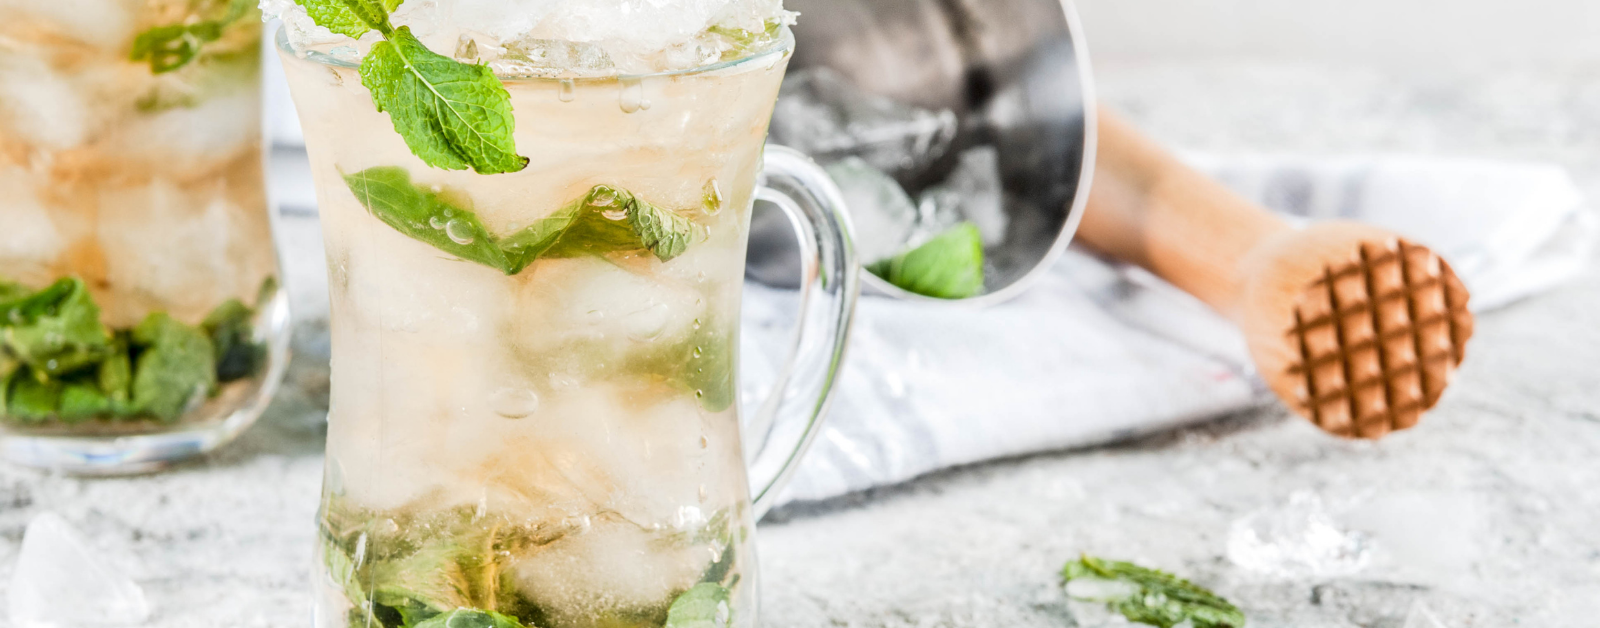 Mint Julep Recipe: The Official Drink of the Kentucky Derby